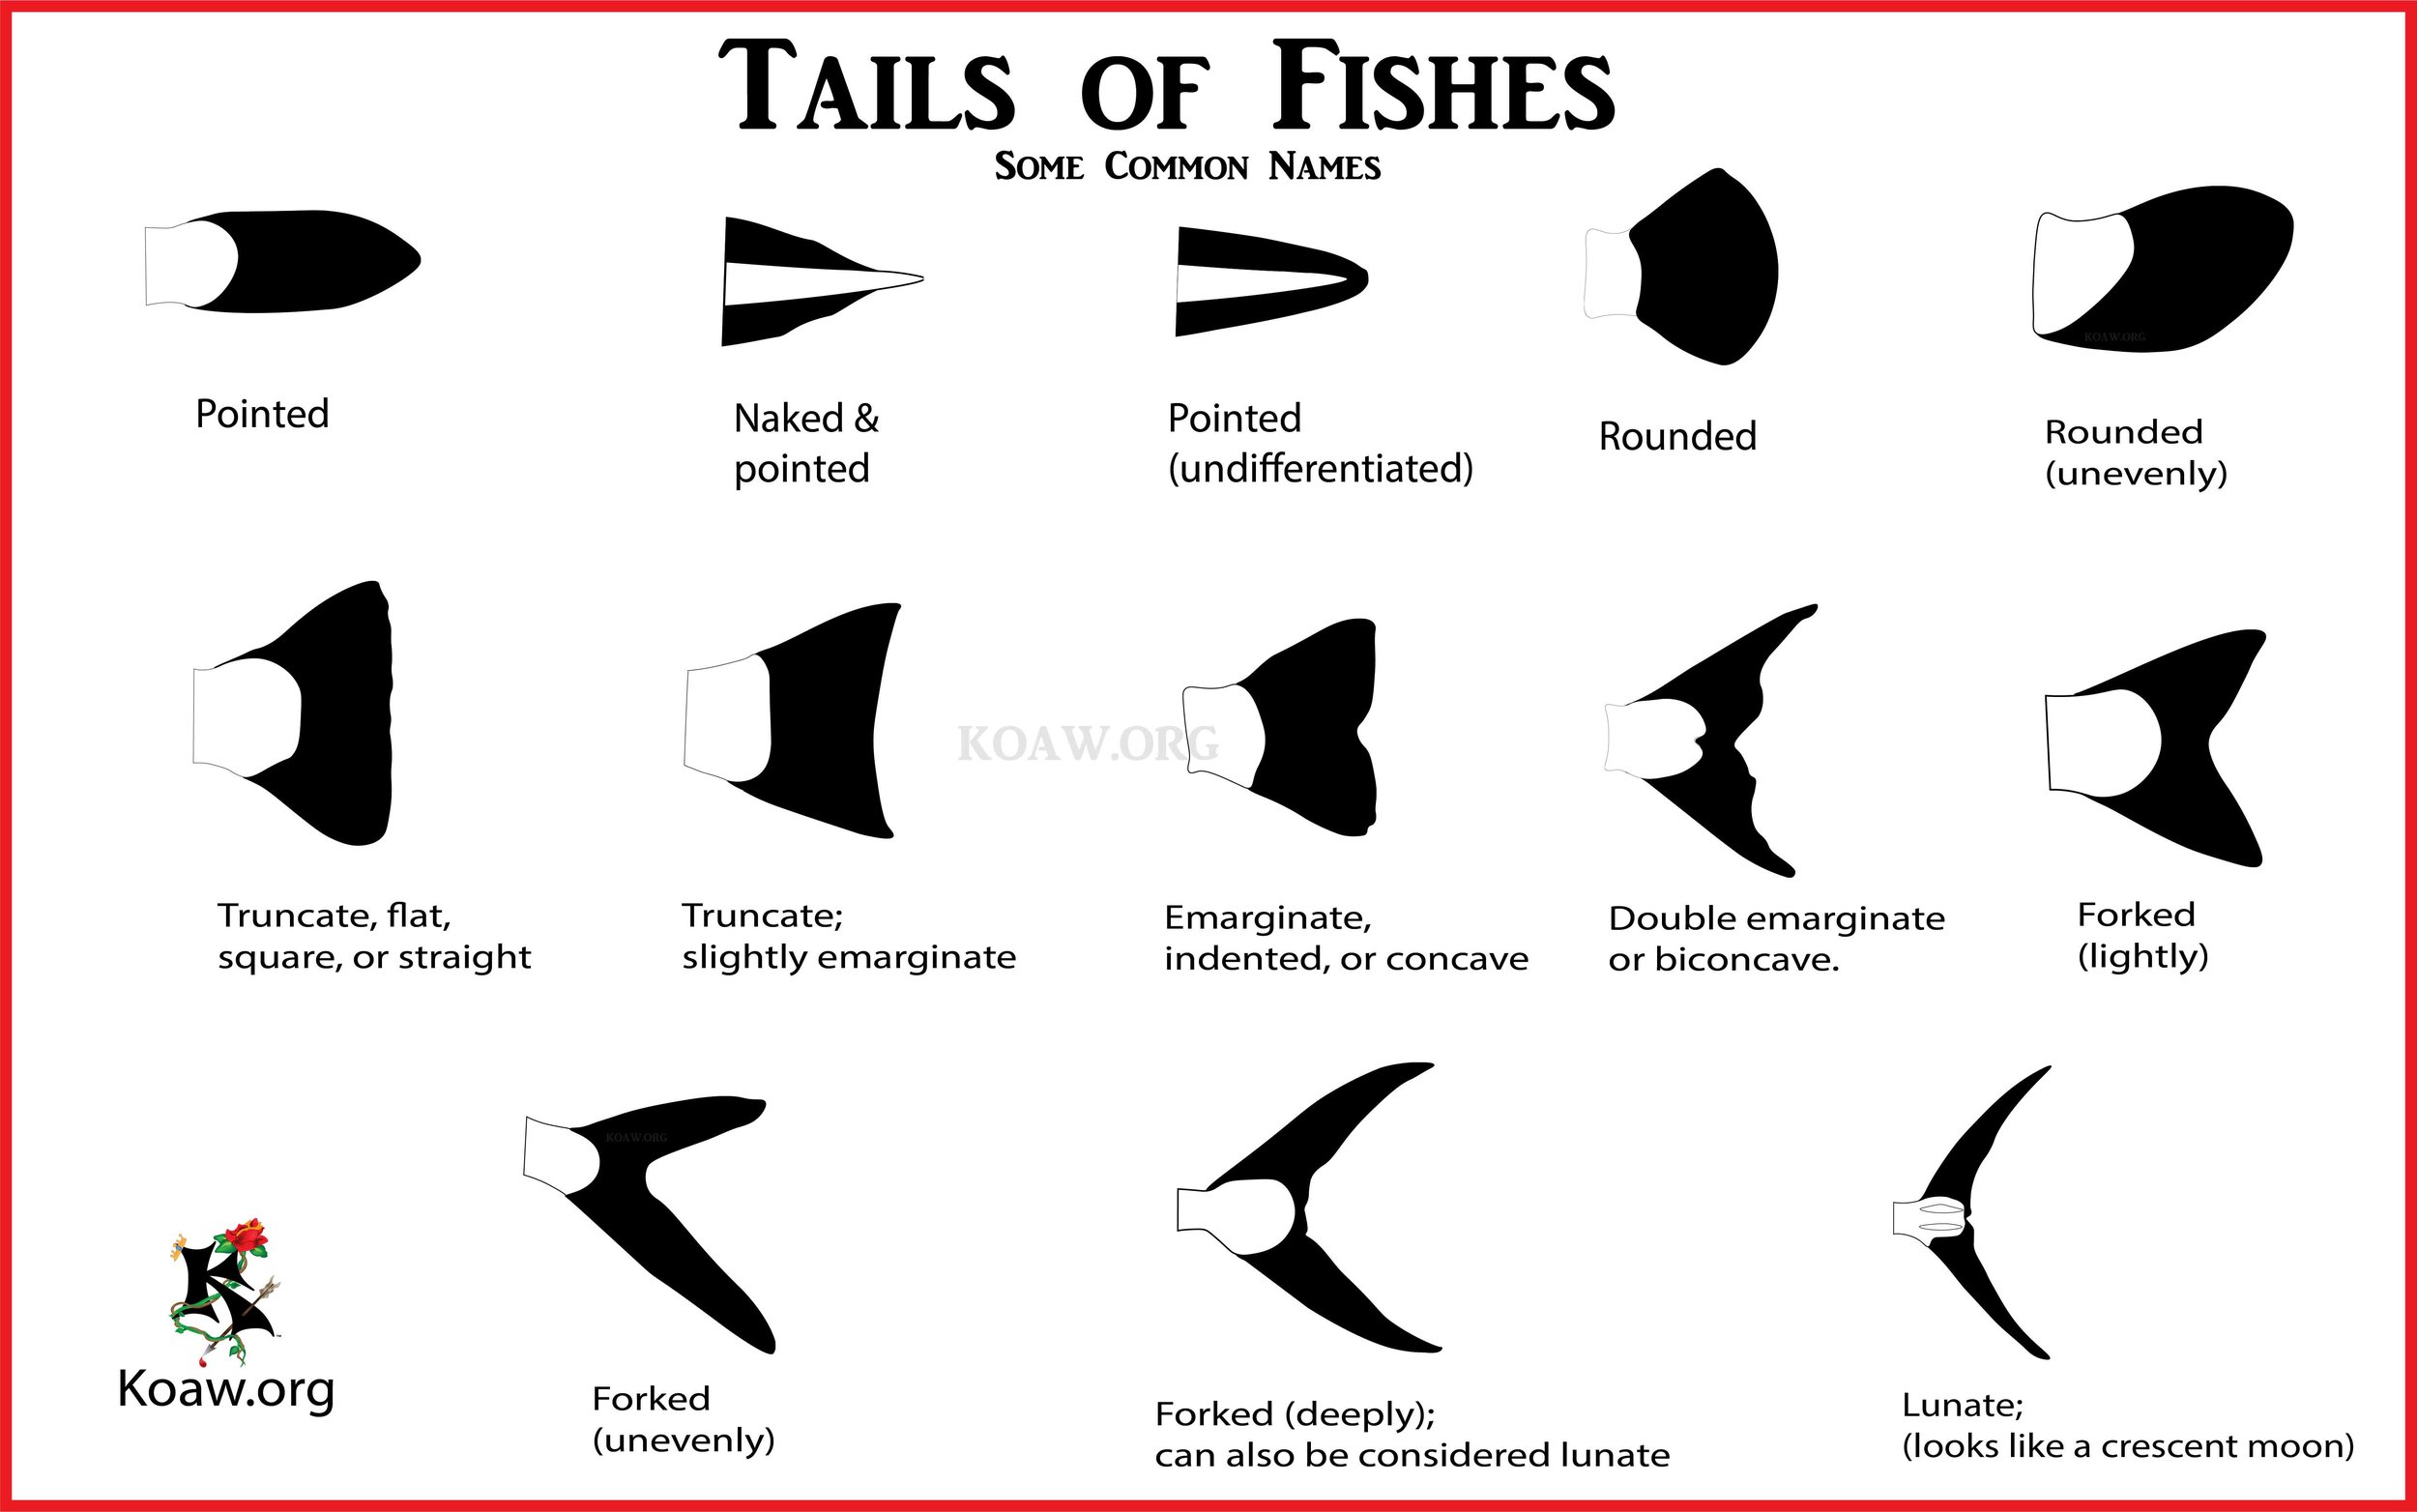 Fish Tails - Caudal Fins of Fishes - By Koaw